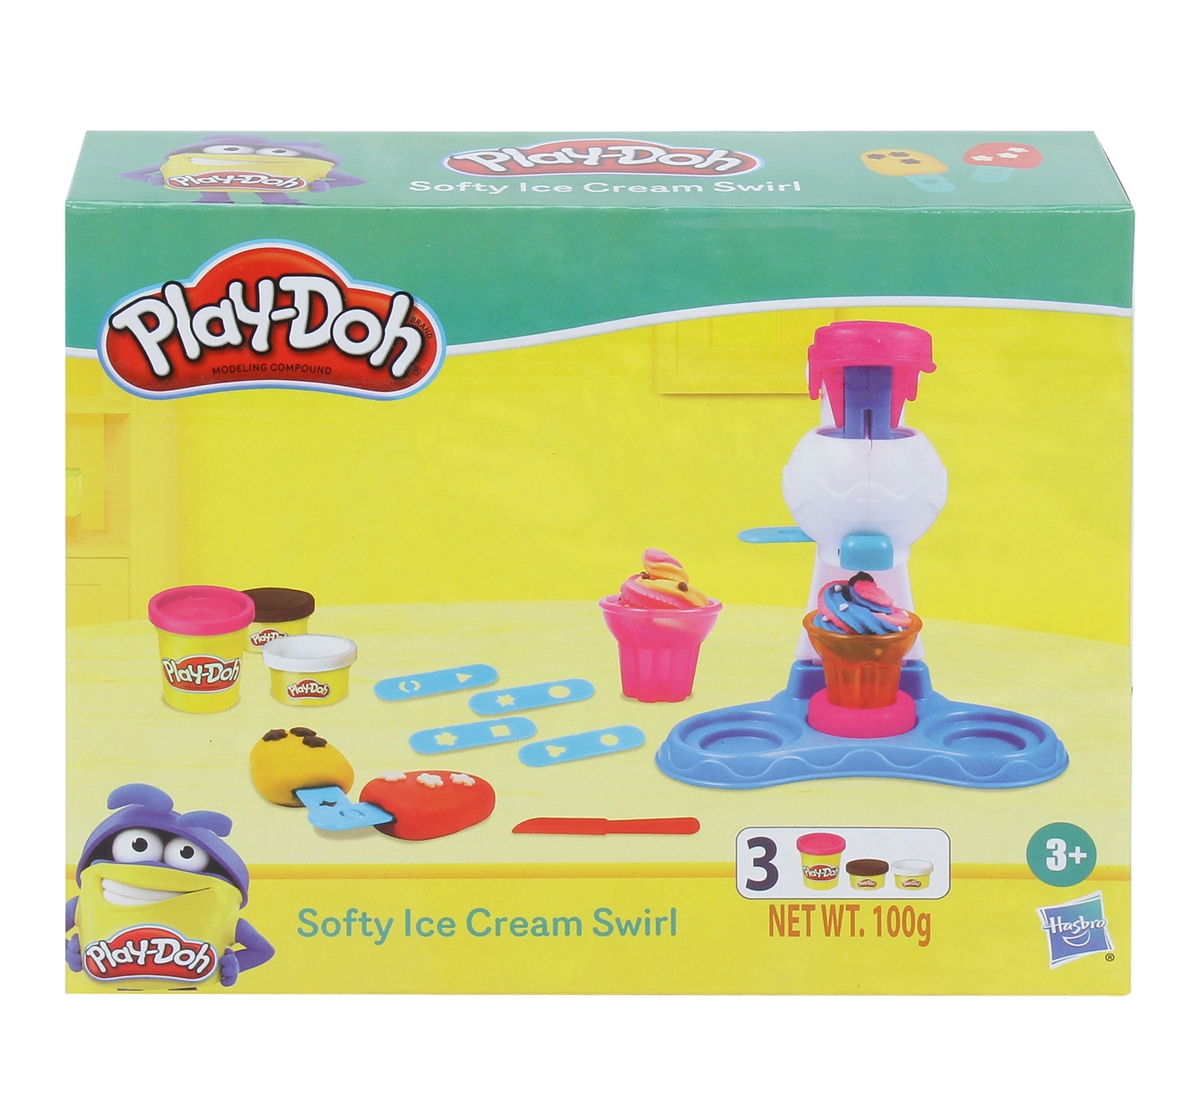 Play-Doh | Play Doh Softy Ice Cream Swirl Playset for Kids 3Y+, Multicolour 3